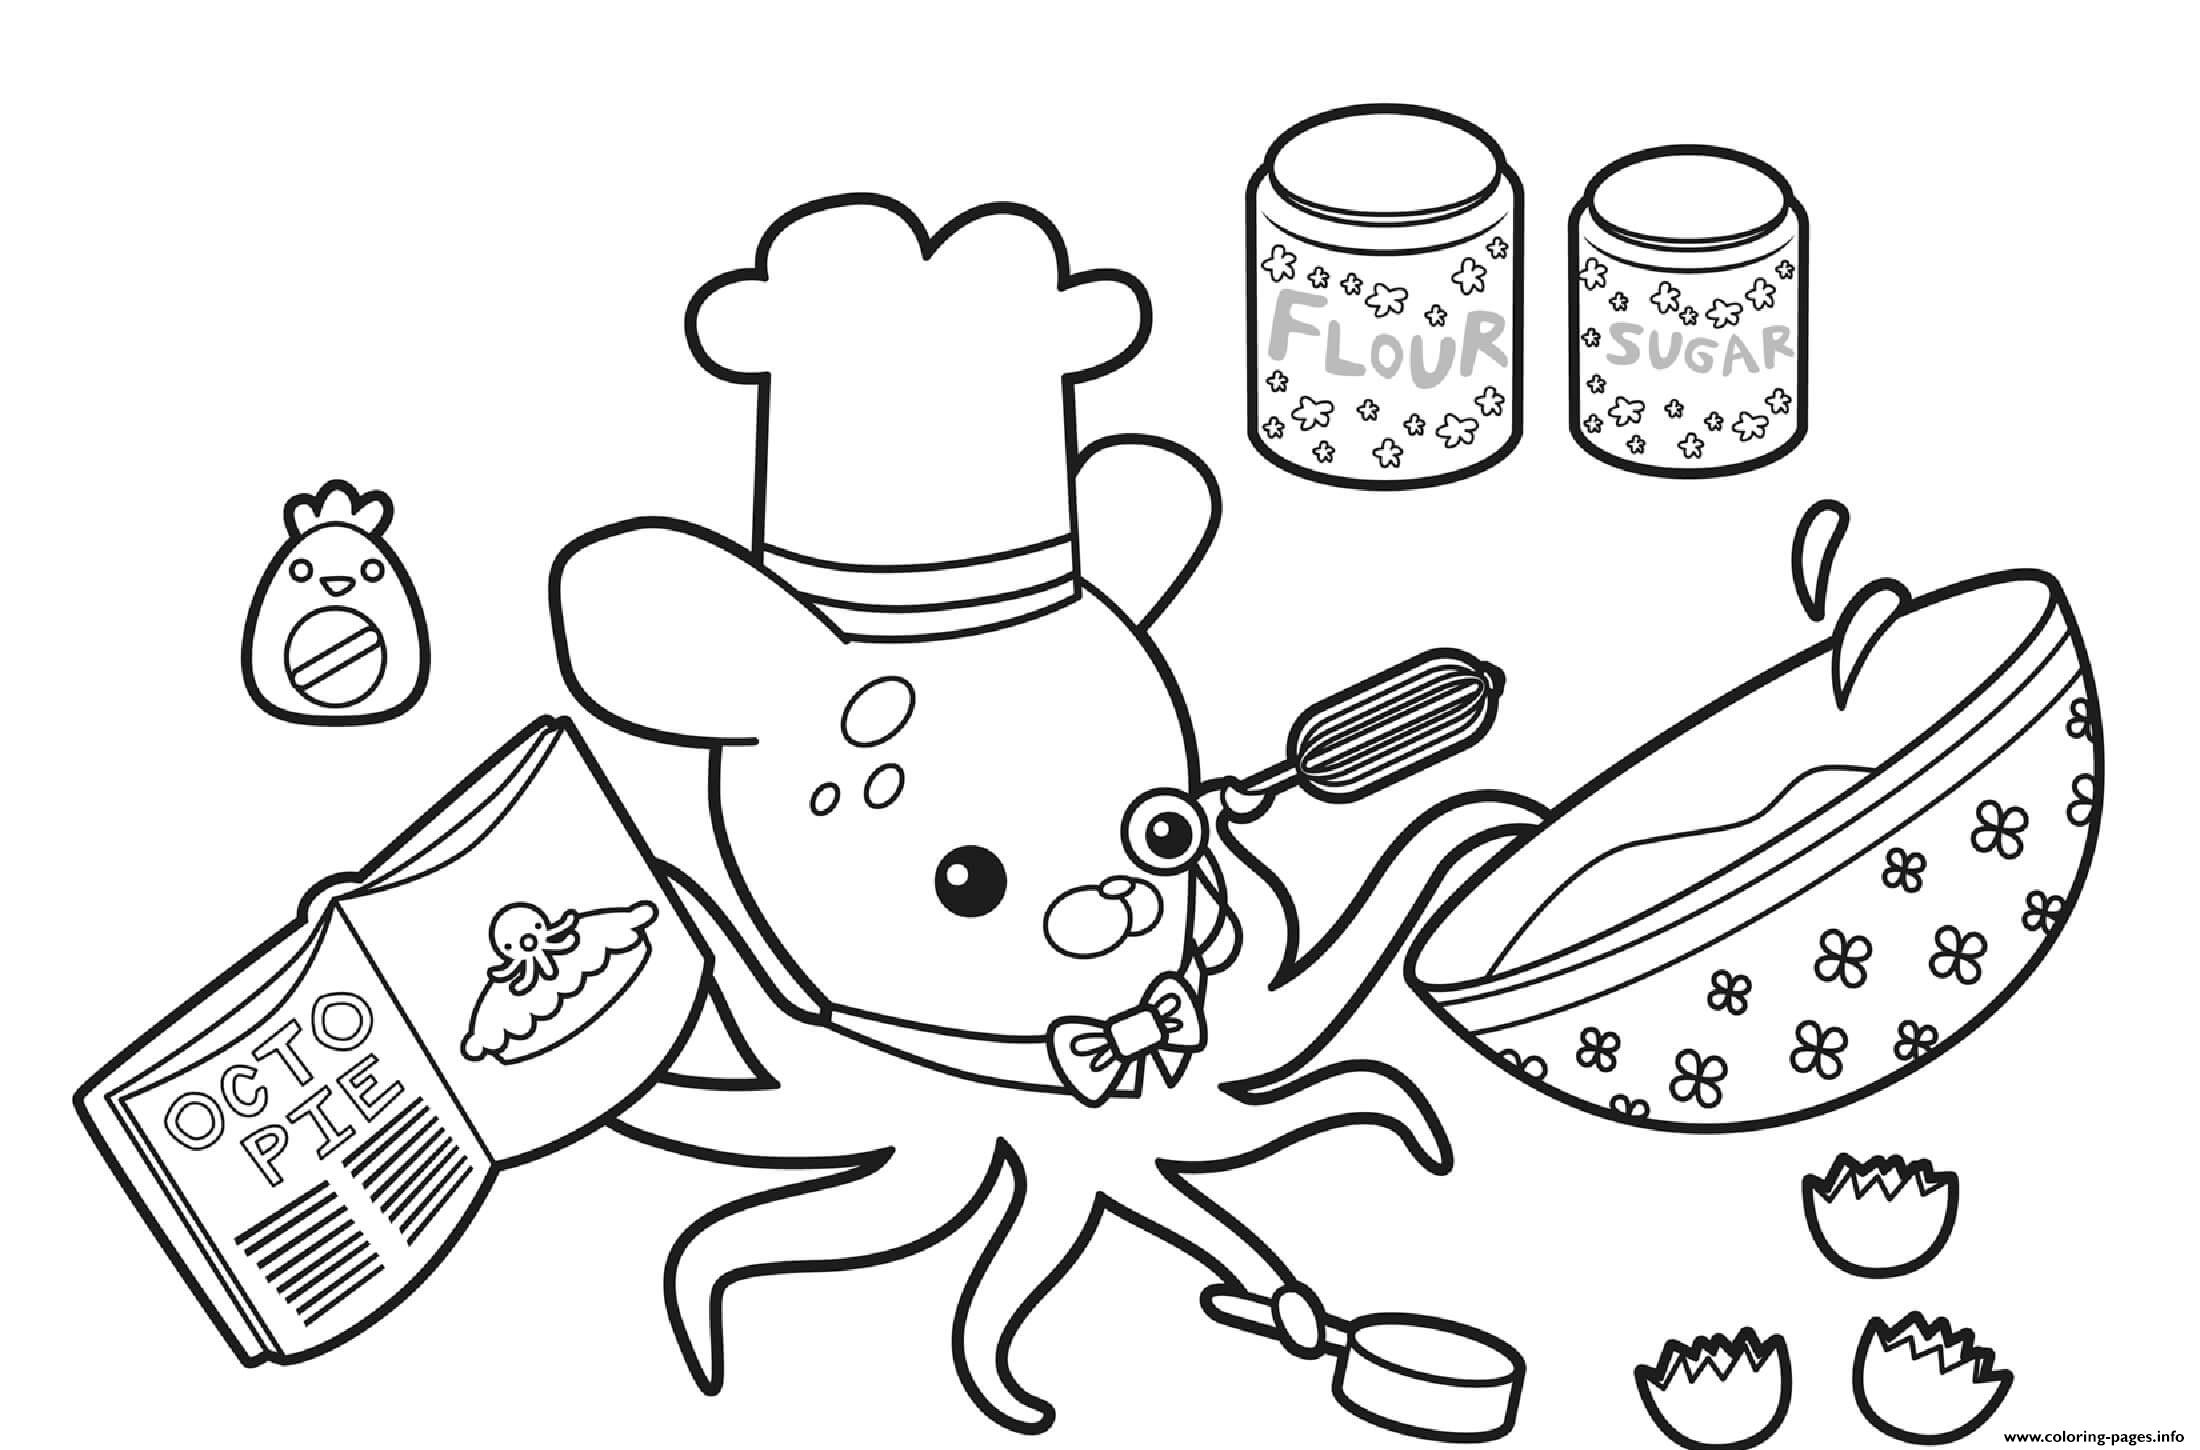 Baking With Professor Inkling Octonauts coloring